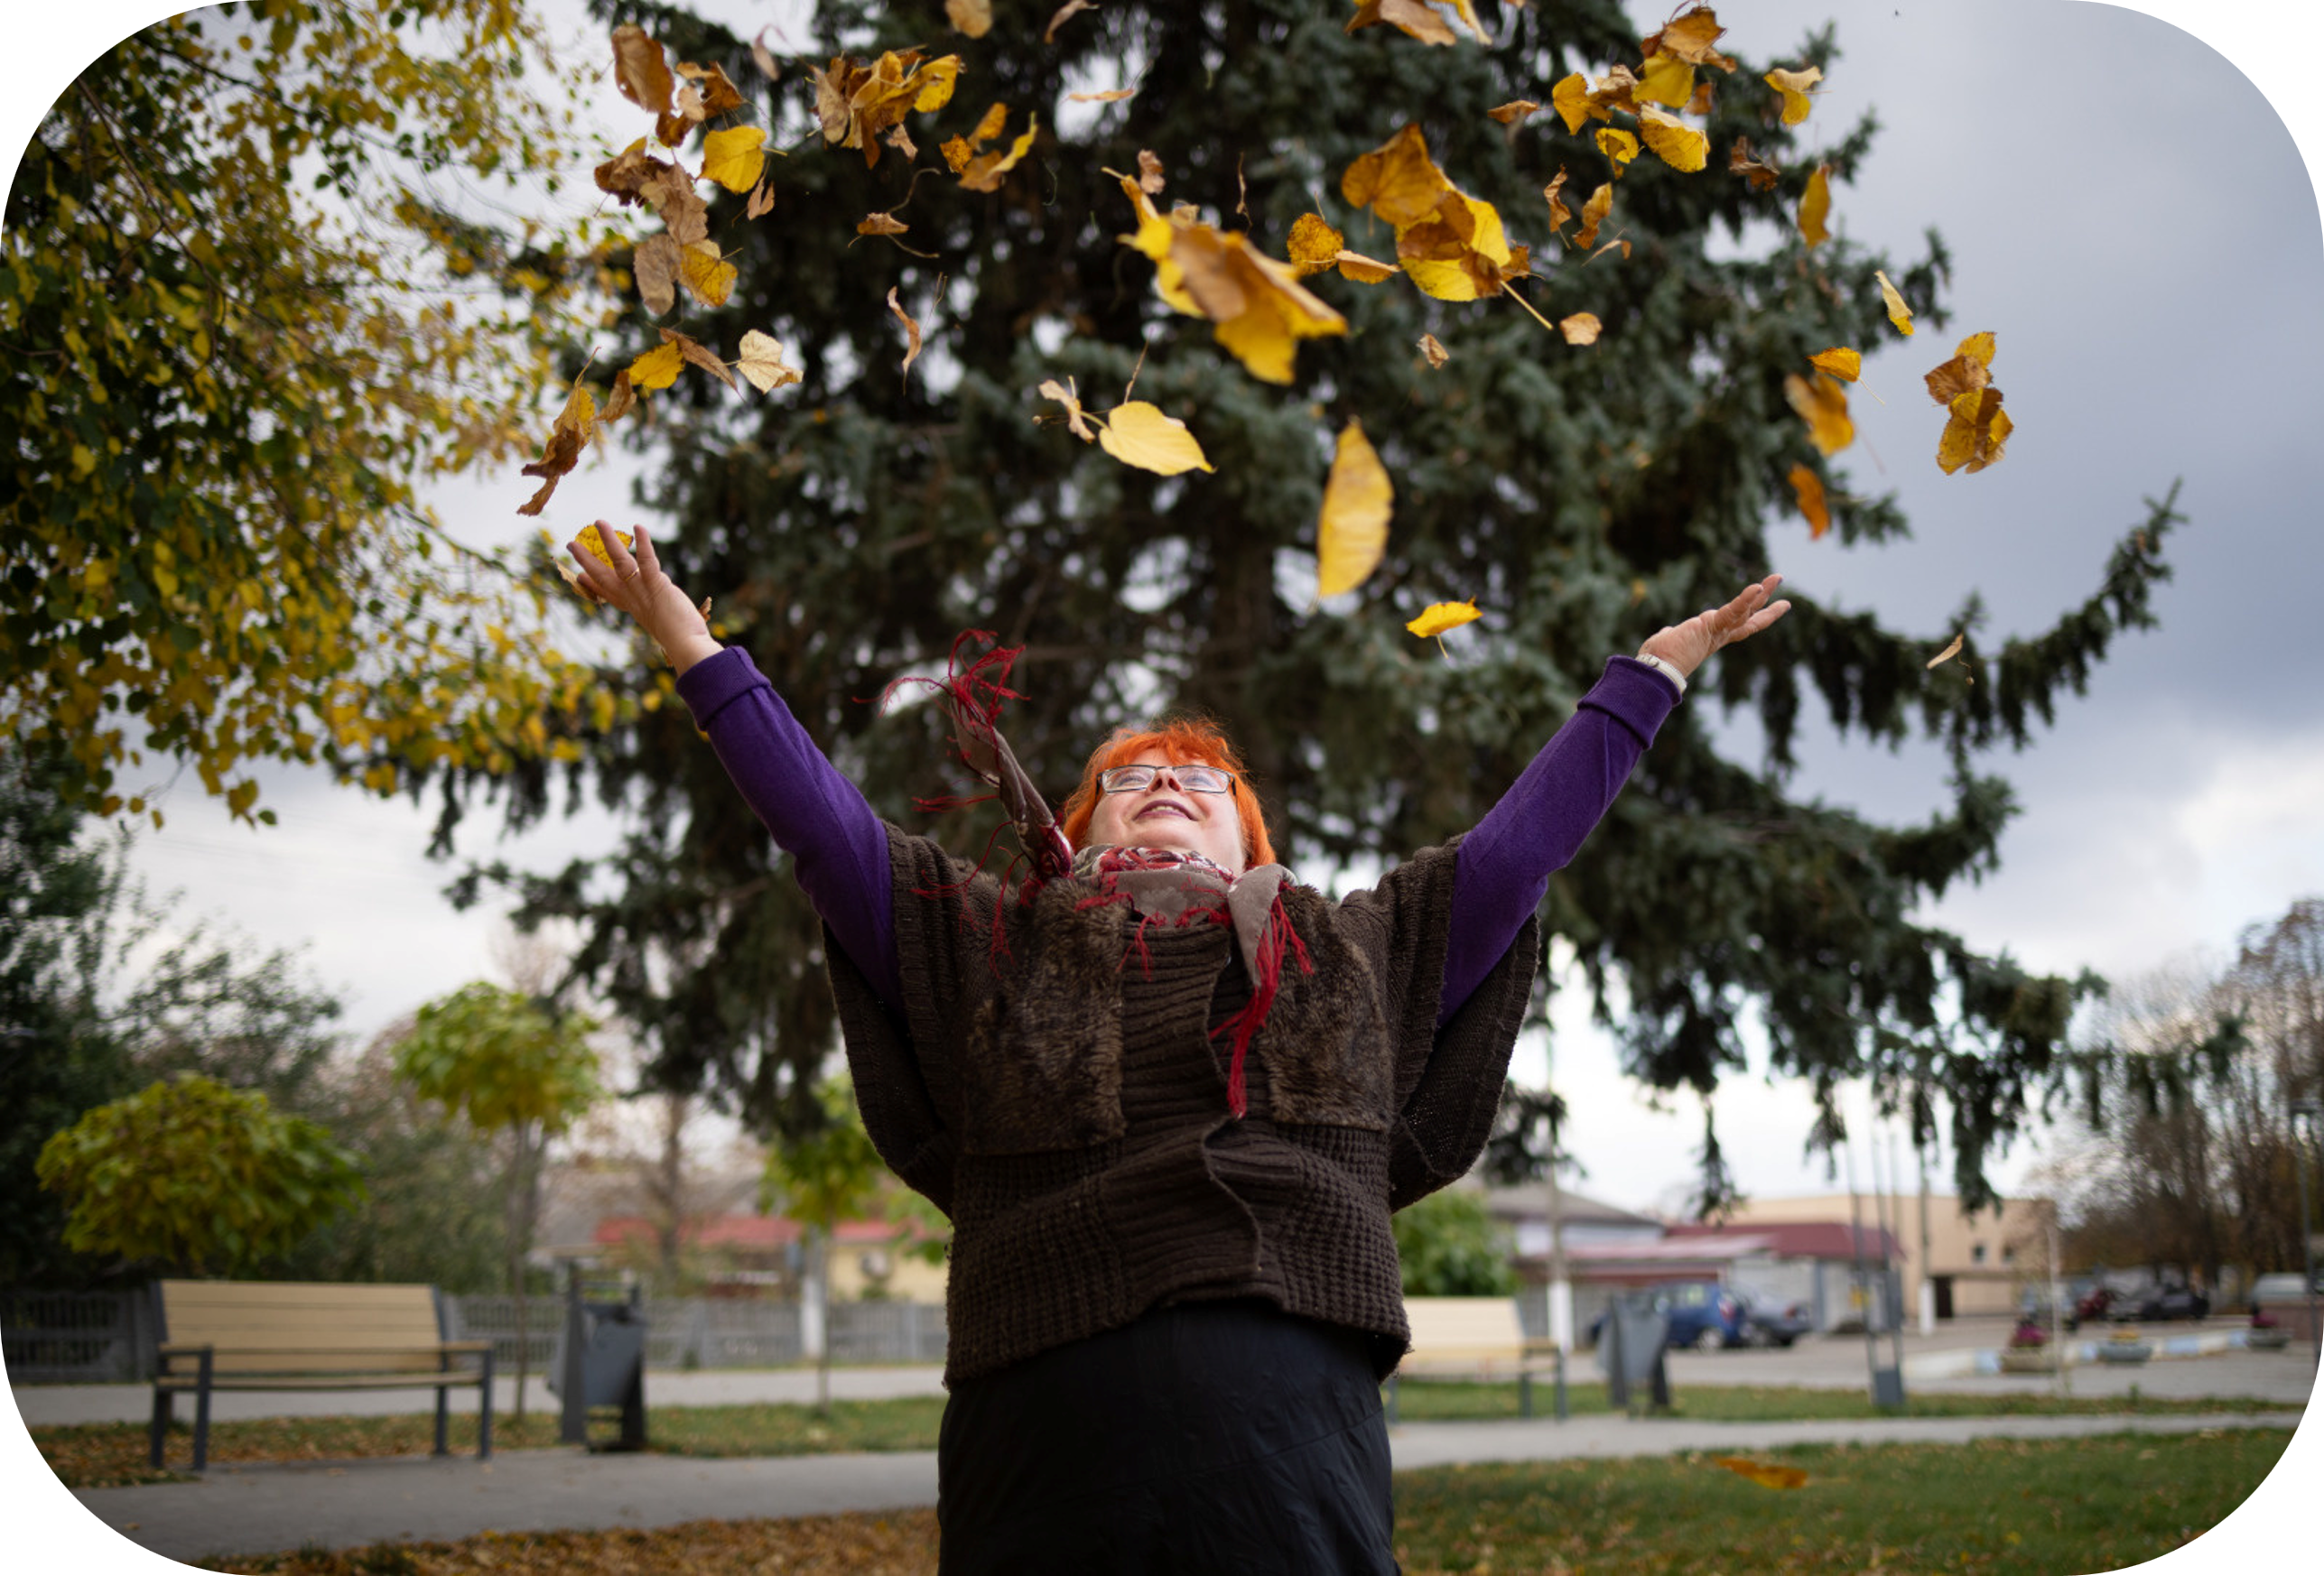 A woman throws leaves in the air